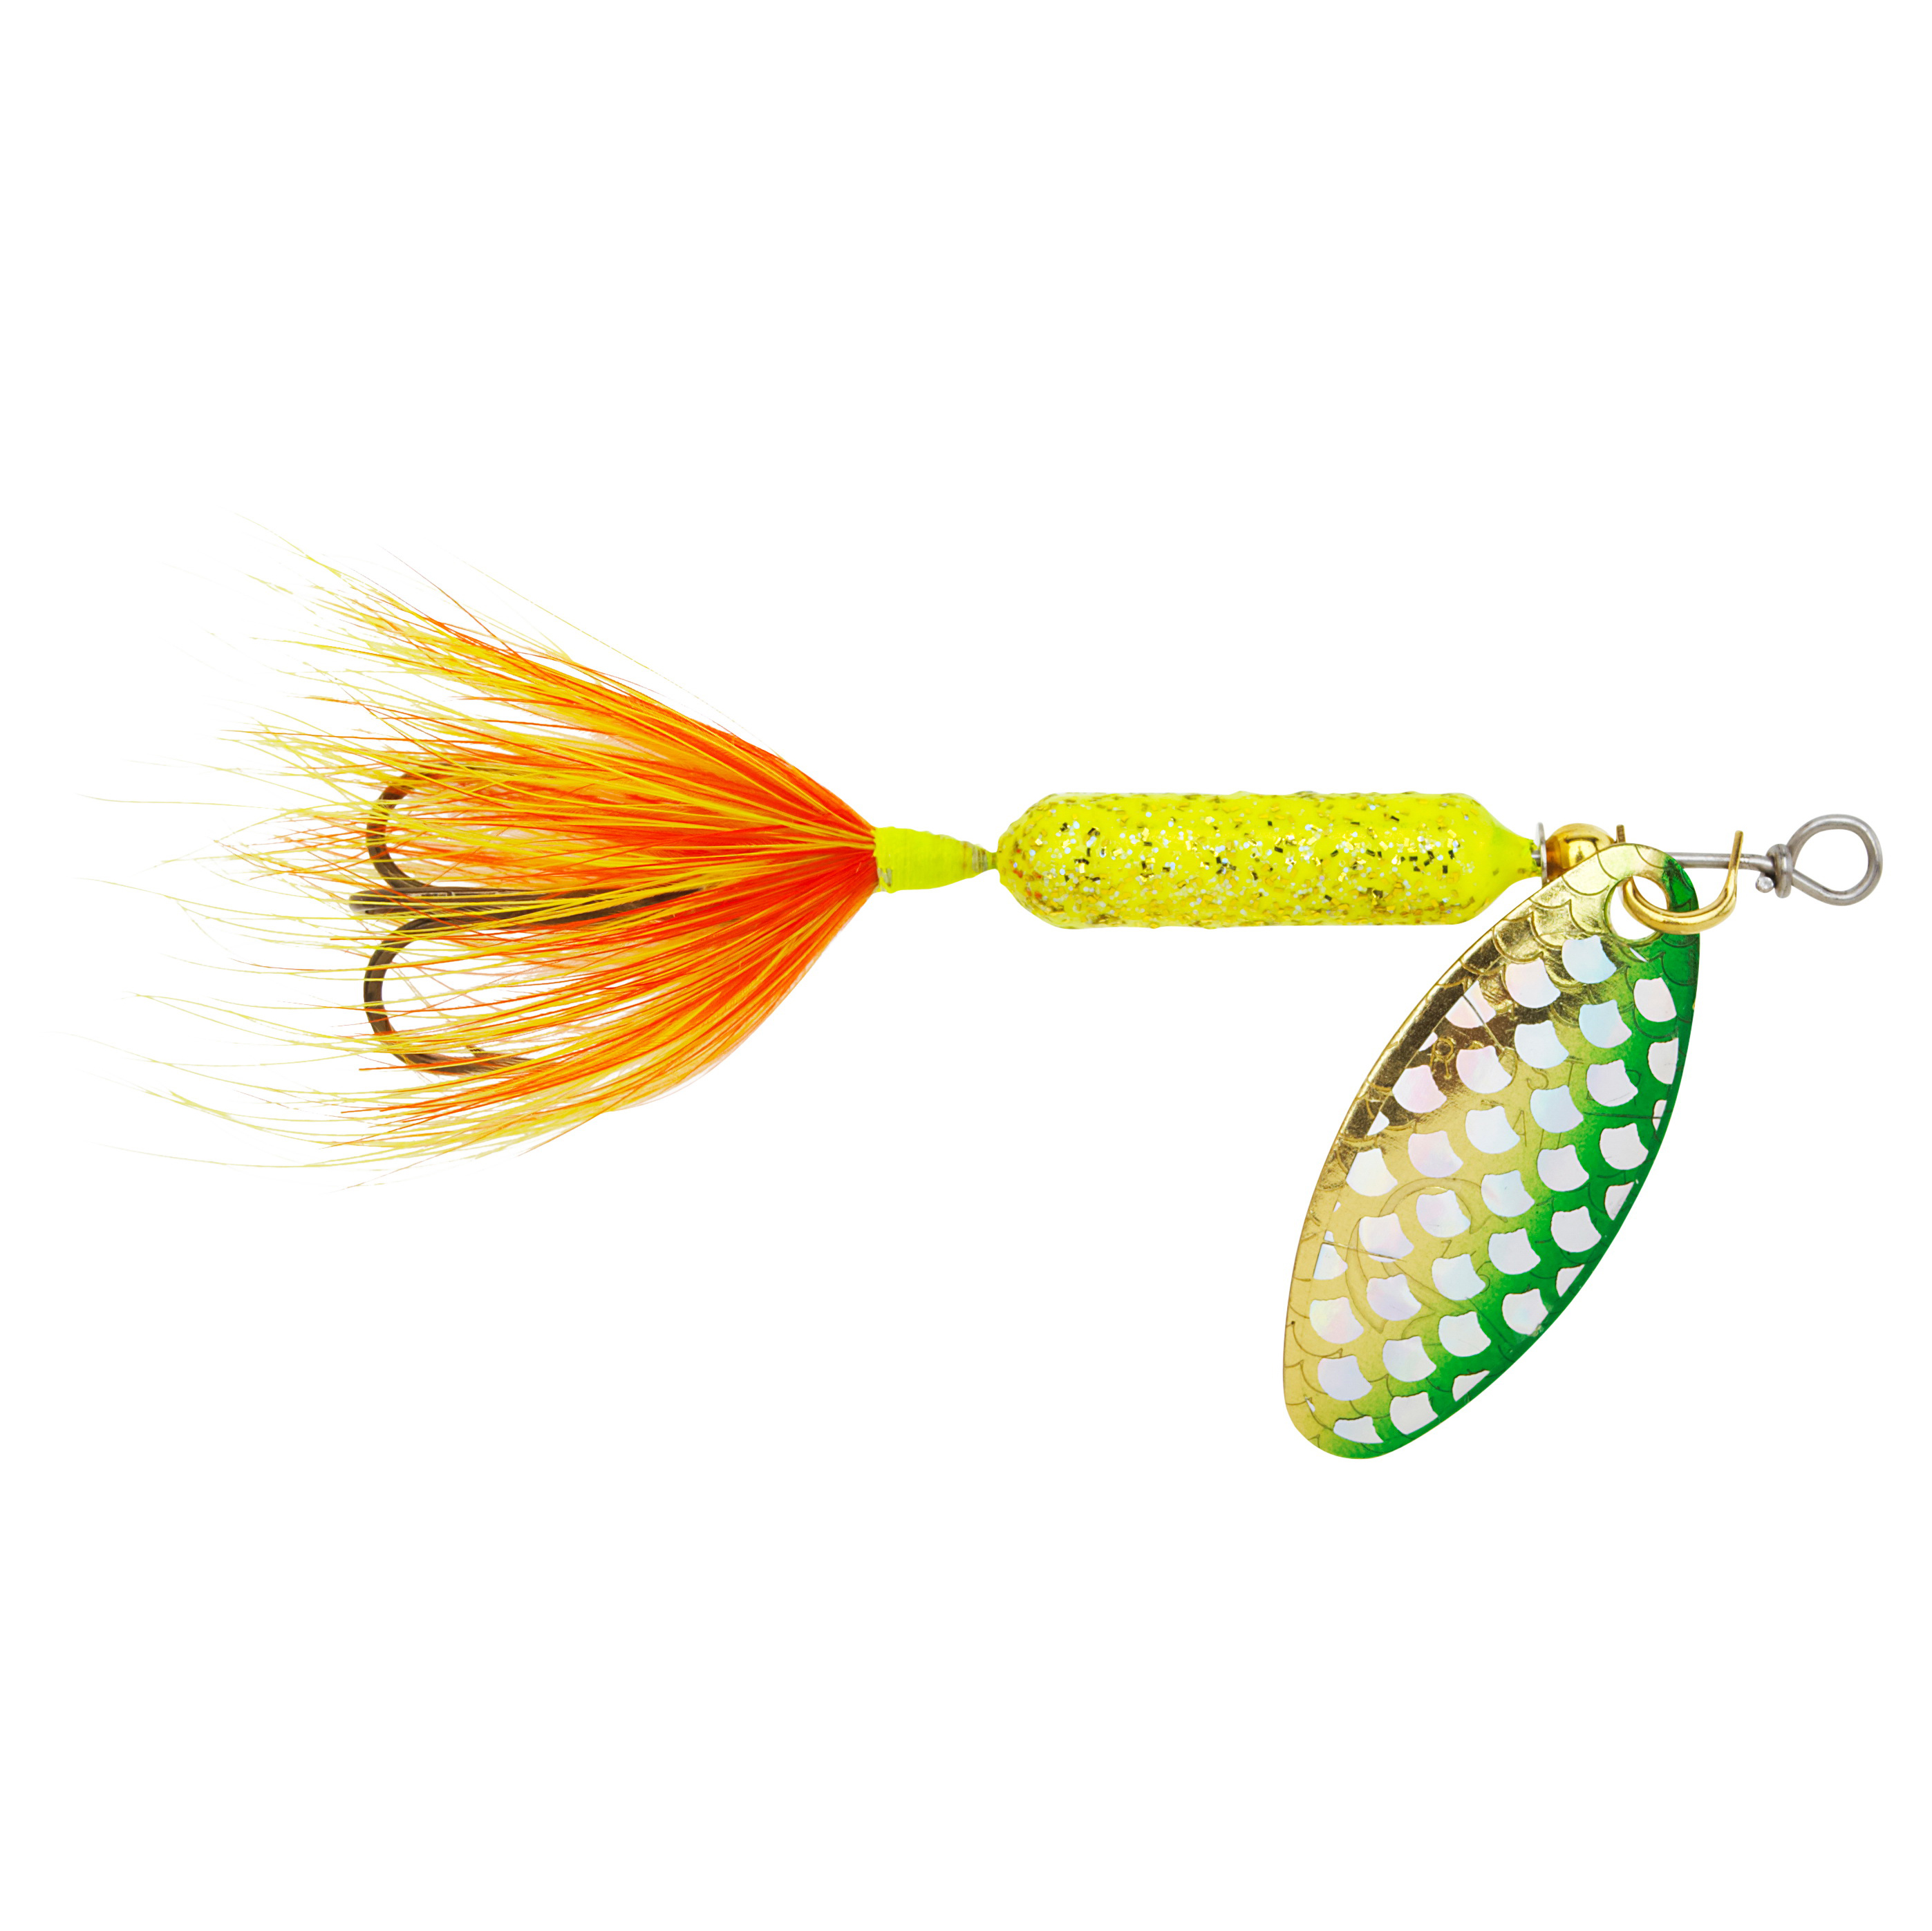 Worden's 206SCHR Fishing Lure, Bass, Crappie, Perch, Trout, Strobe Chartreuse Lure - 1